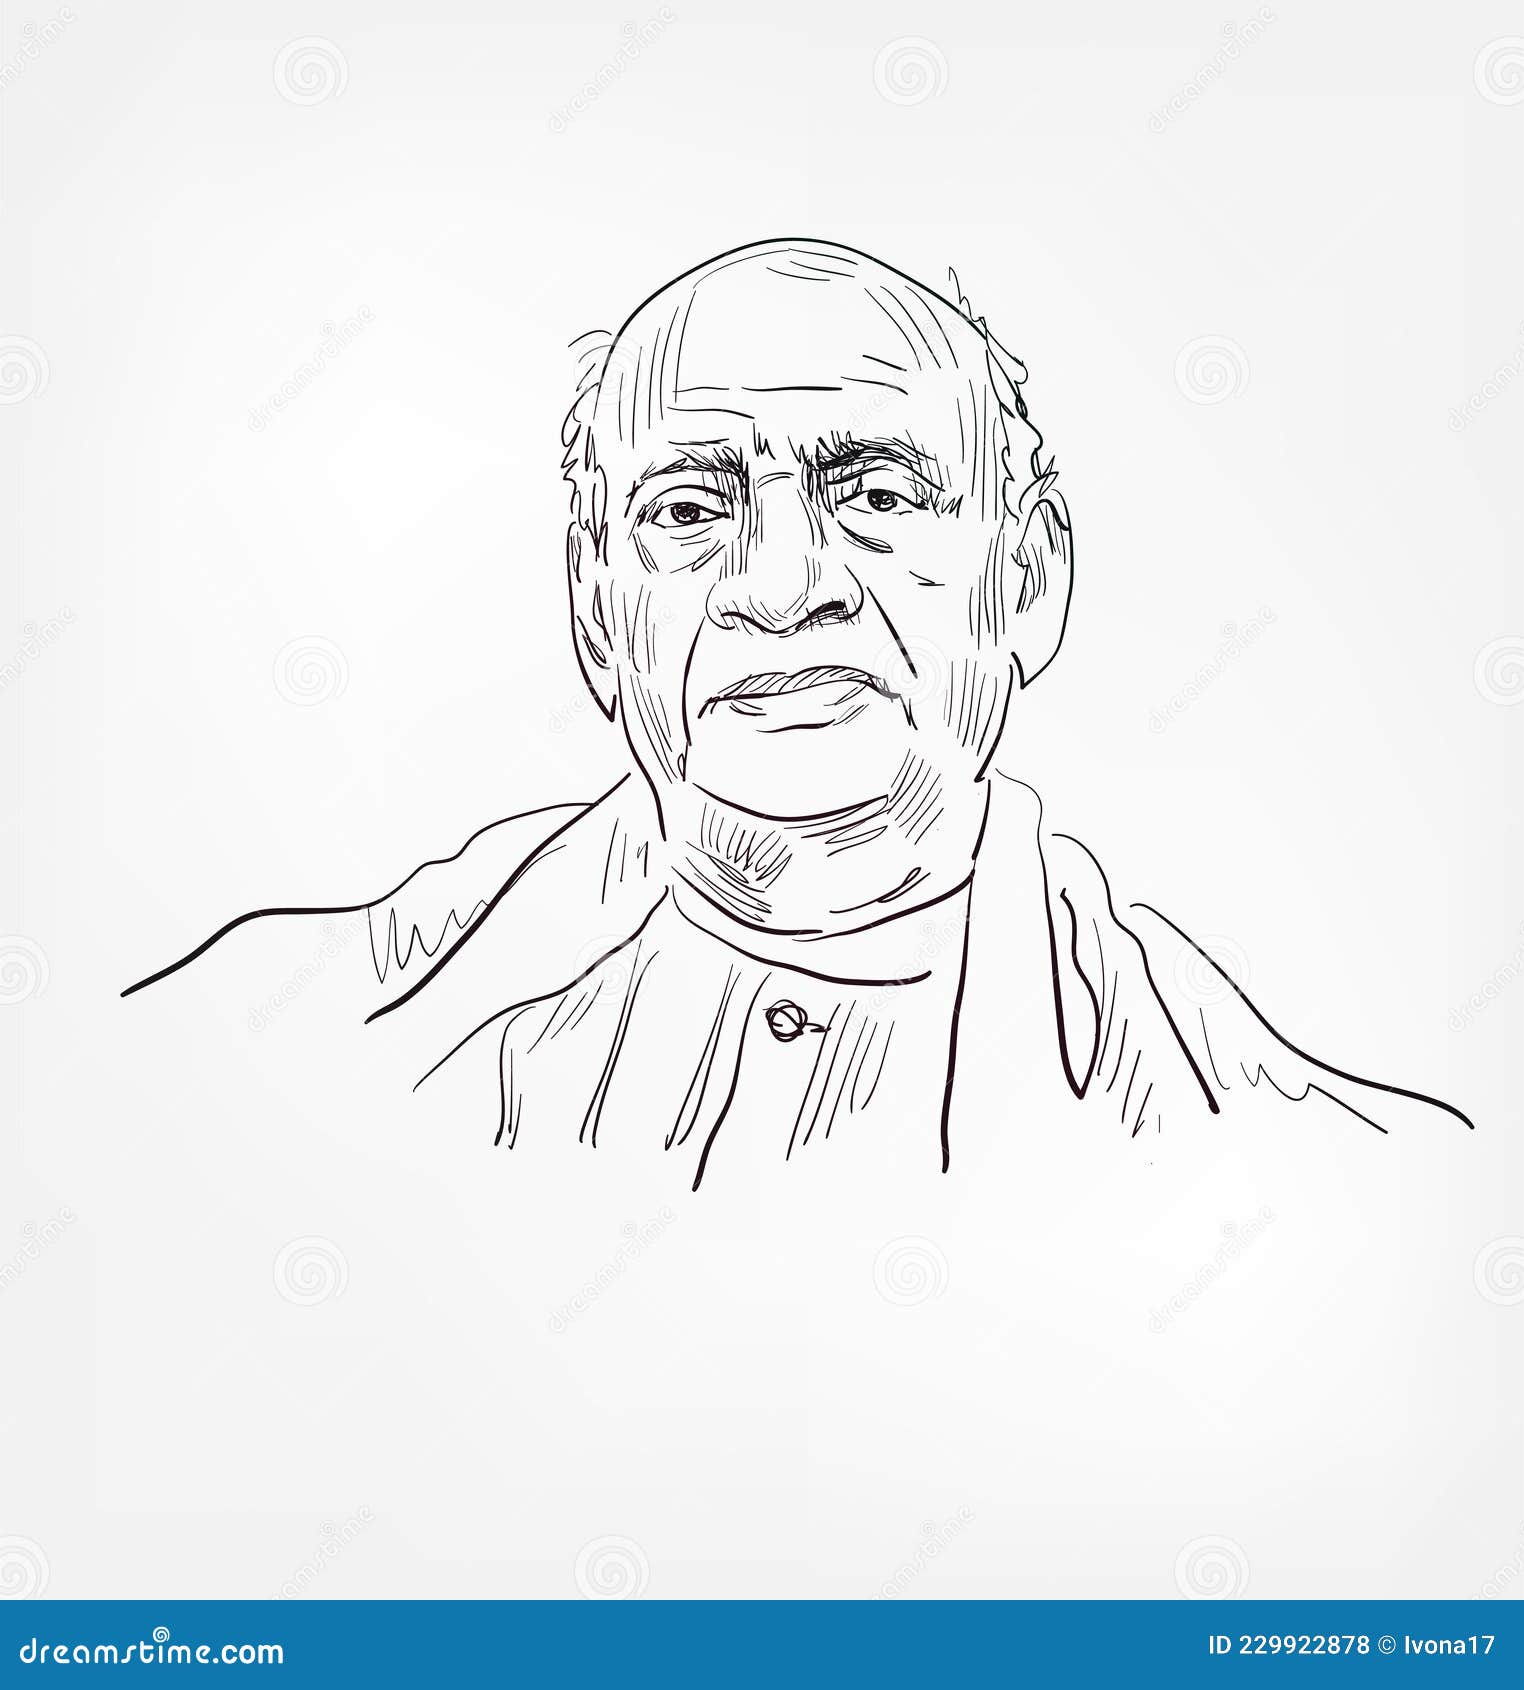 Vector Illustration of Sardar Vallabhbhai Patel, the Iron man of India  during independence 1947. Sketch with tricolor Indian Flag. - Stock Image -  Everypixel